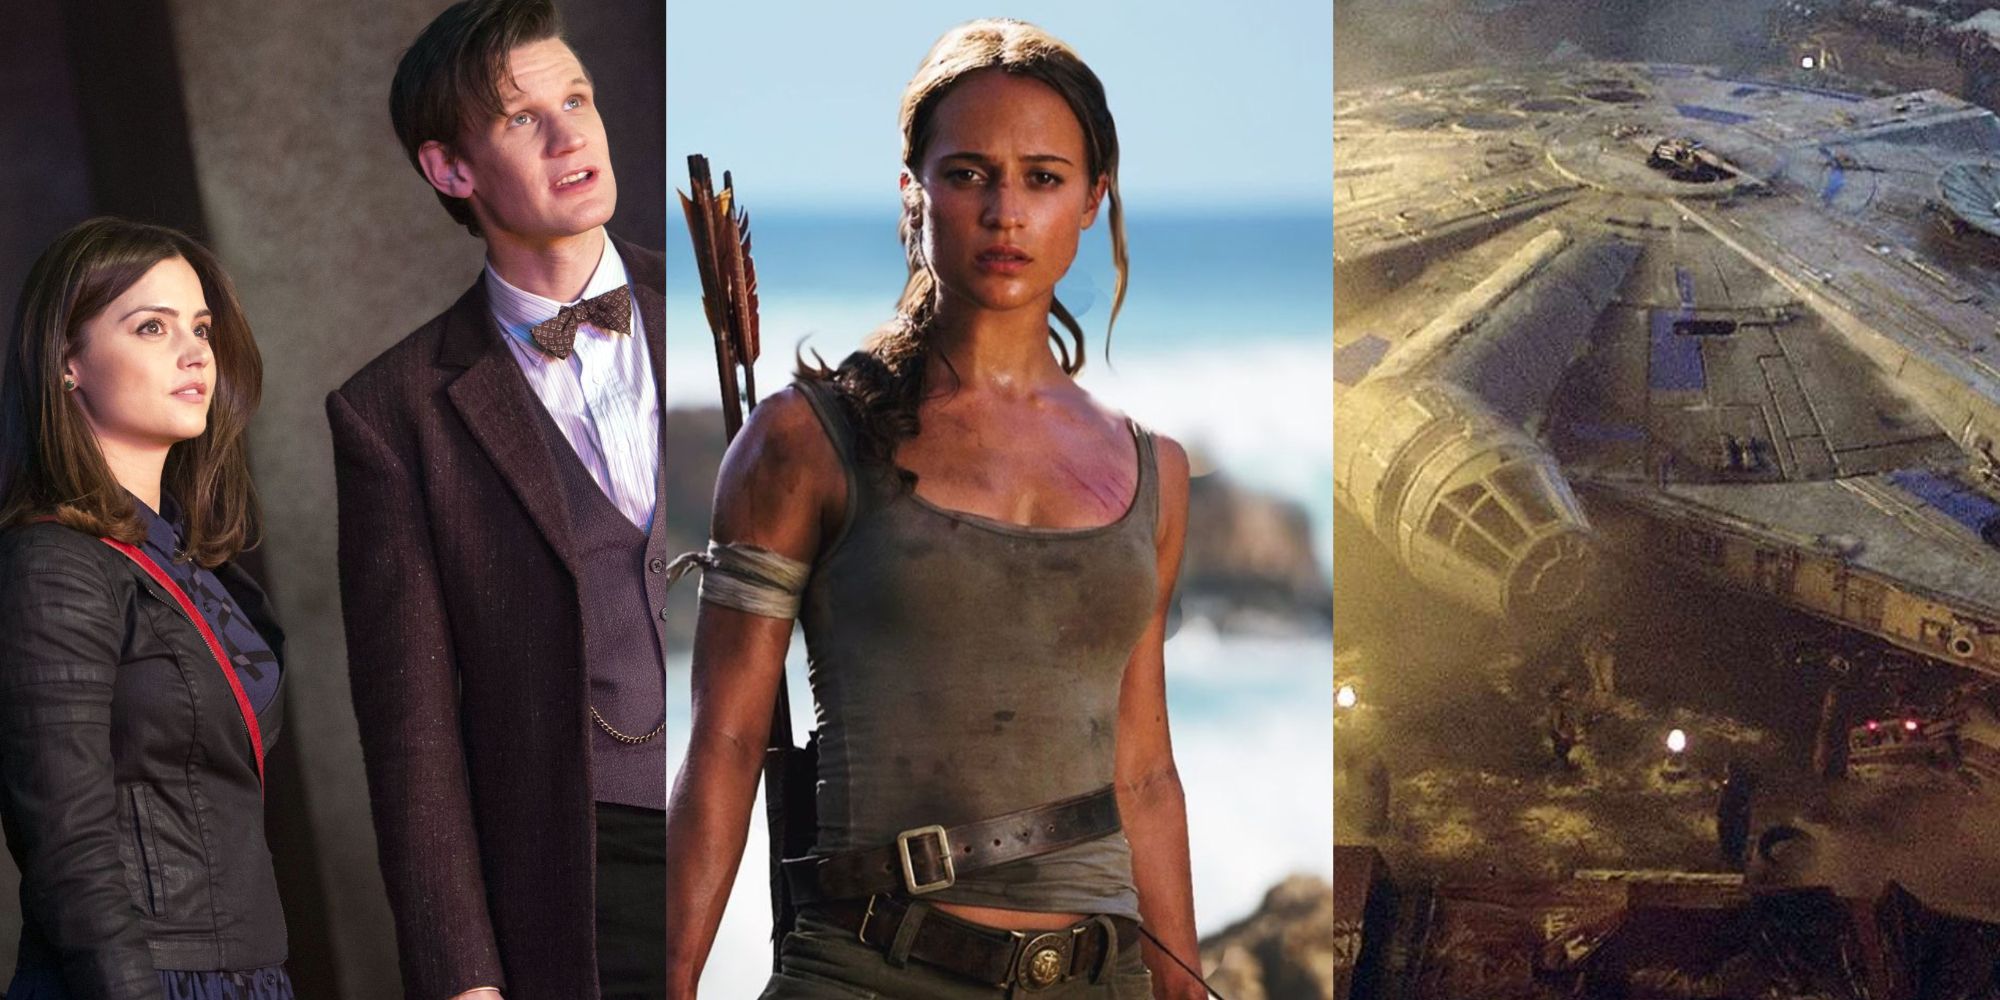 Split image of Doctor Who, Tomb Raider and Millenium Falcon feature